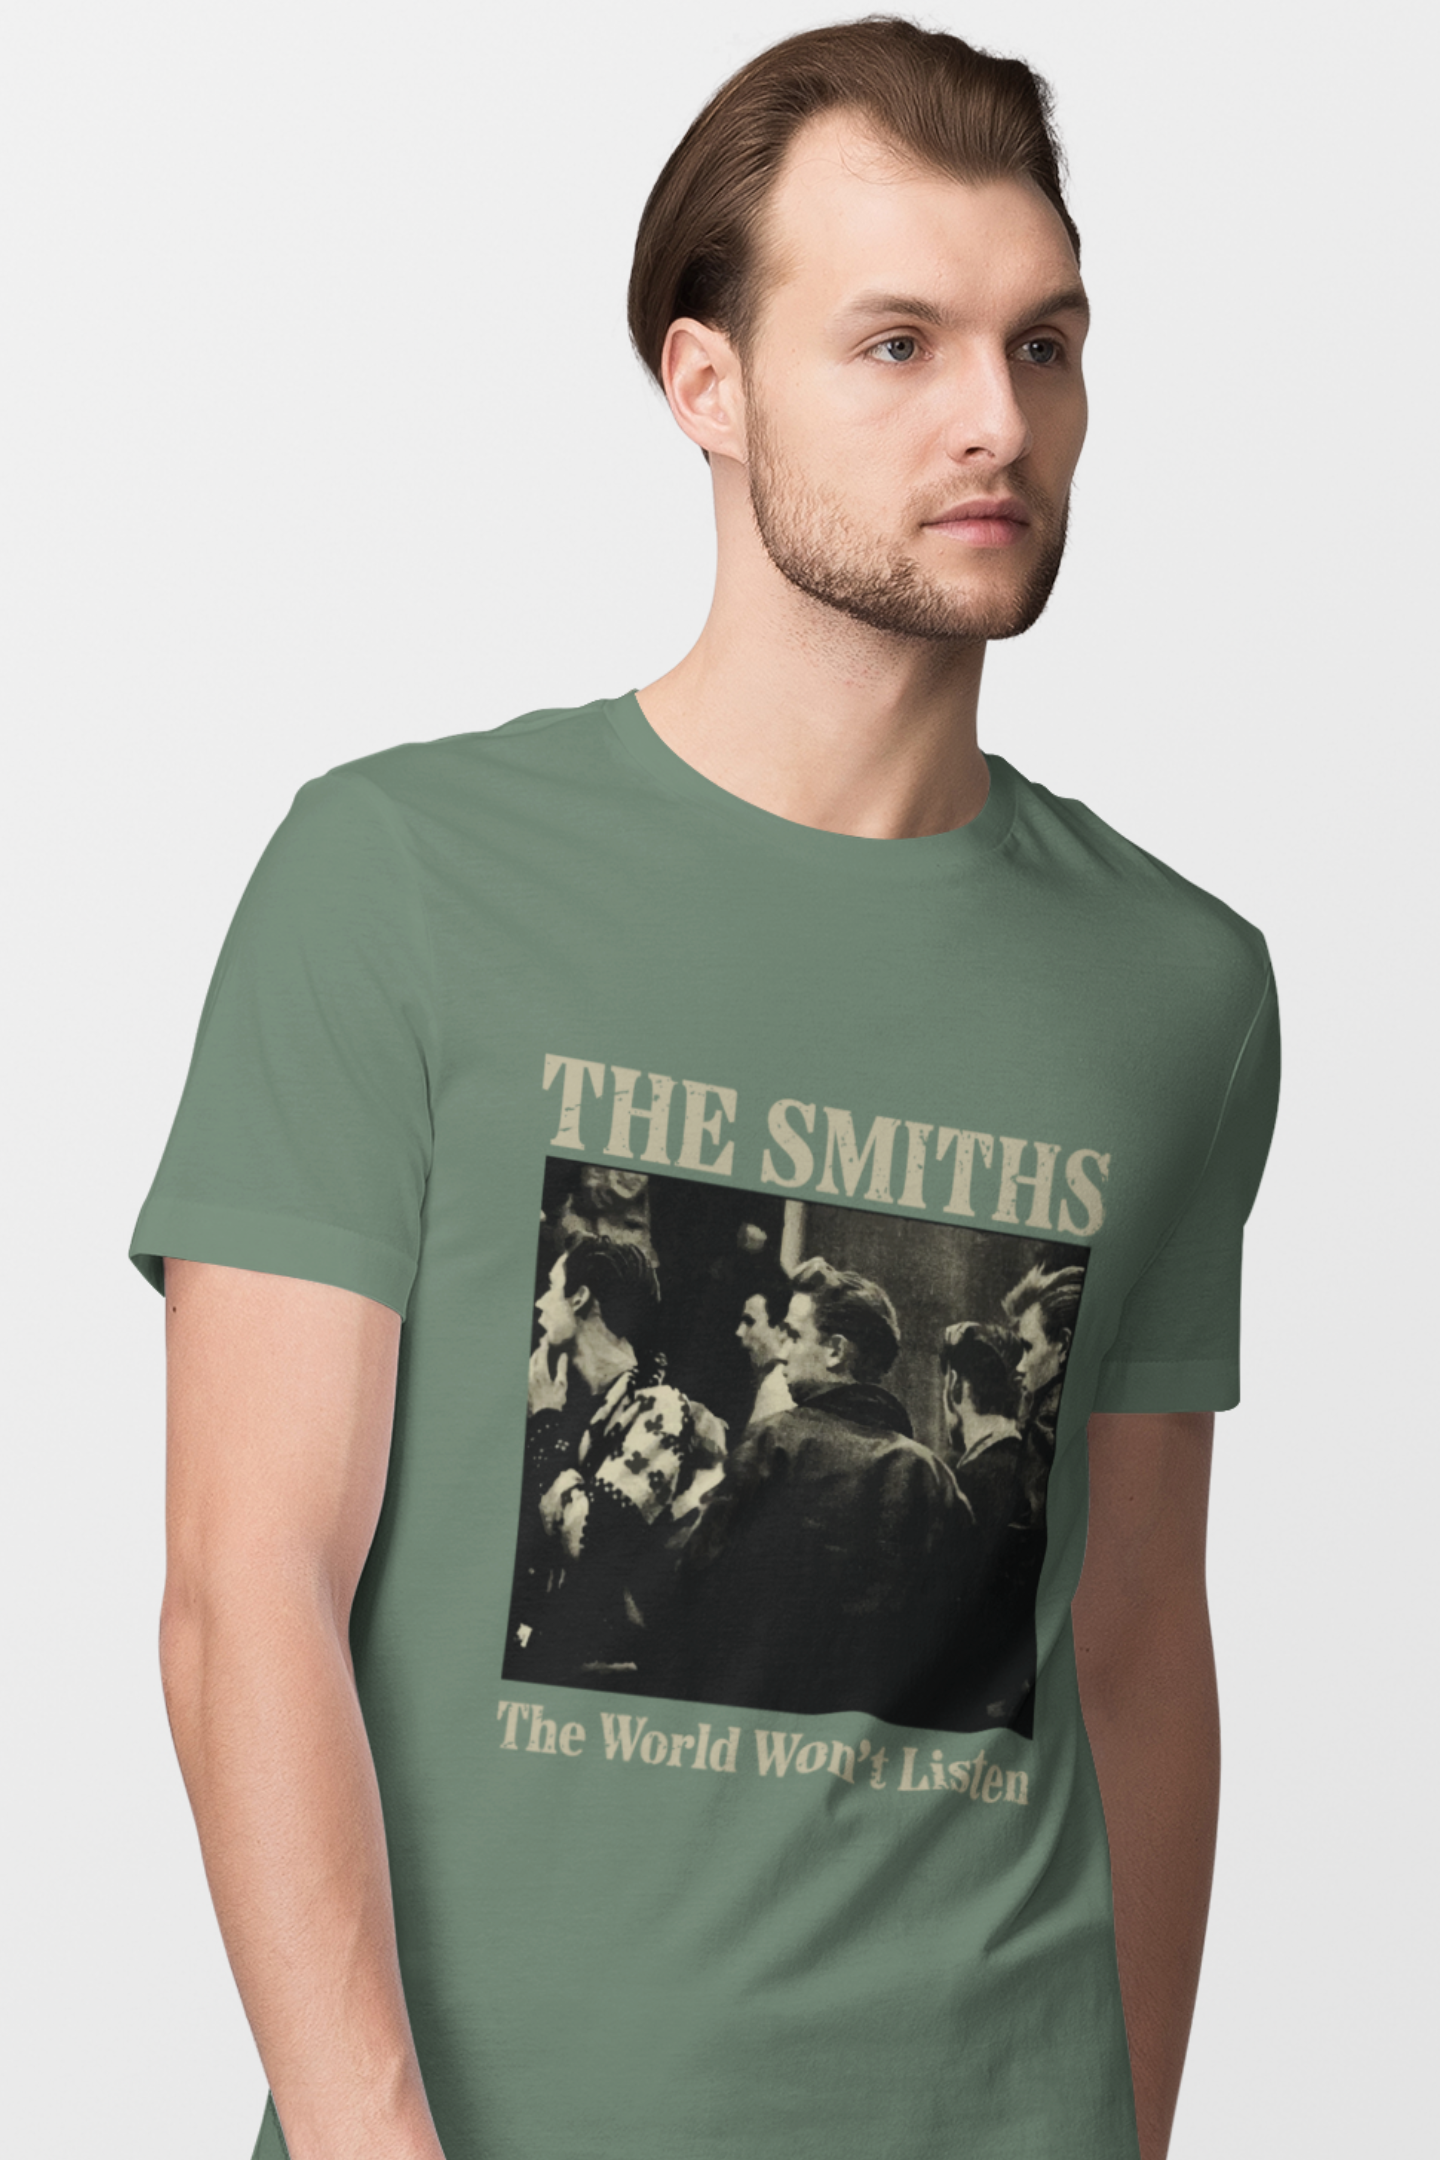 The World Won't Listen | The Smiths T Shirt | The Smiths Gift | Rock and Roll | Morrissey T Shirt